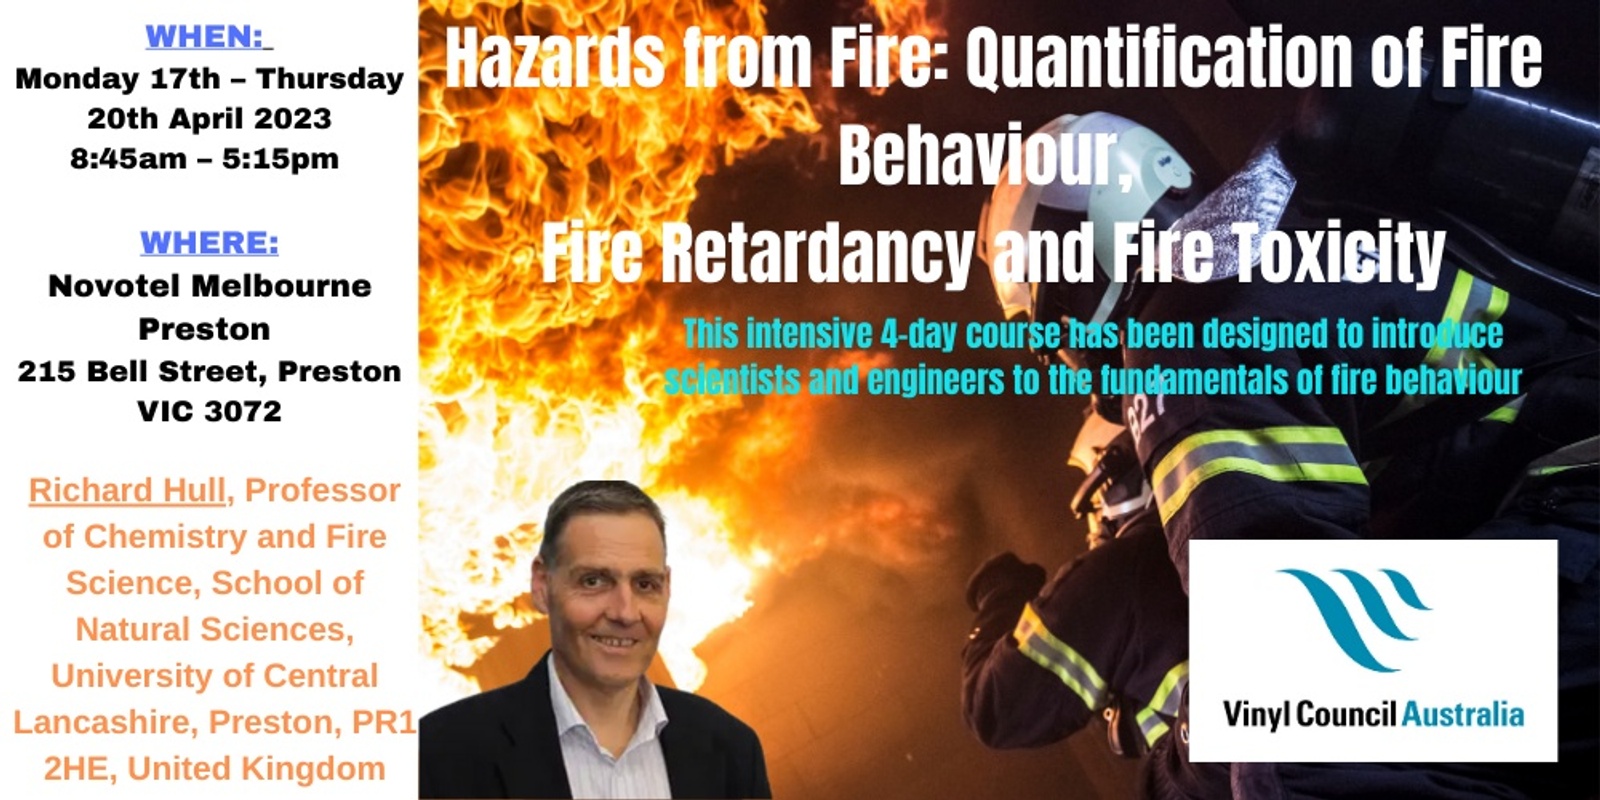 Banner image for Hazards from Fire: Quantification of Fire Behaviour, Fire Retardancy and Fire Toxicity